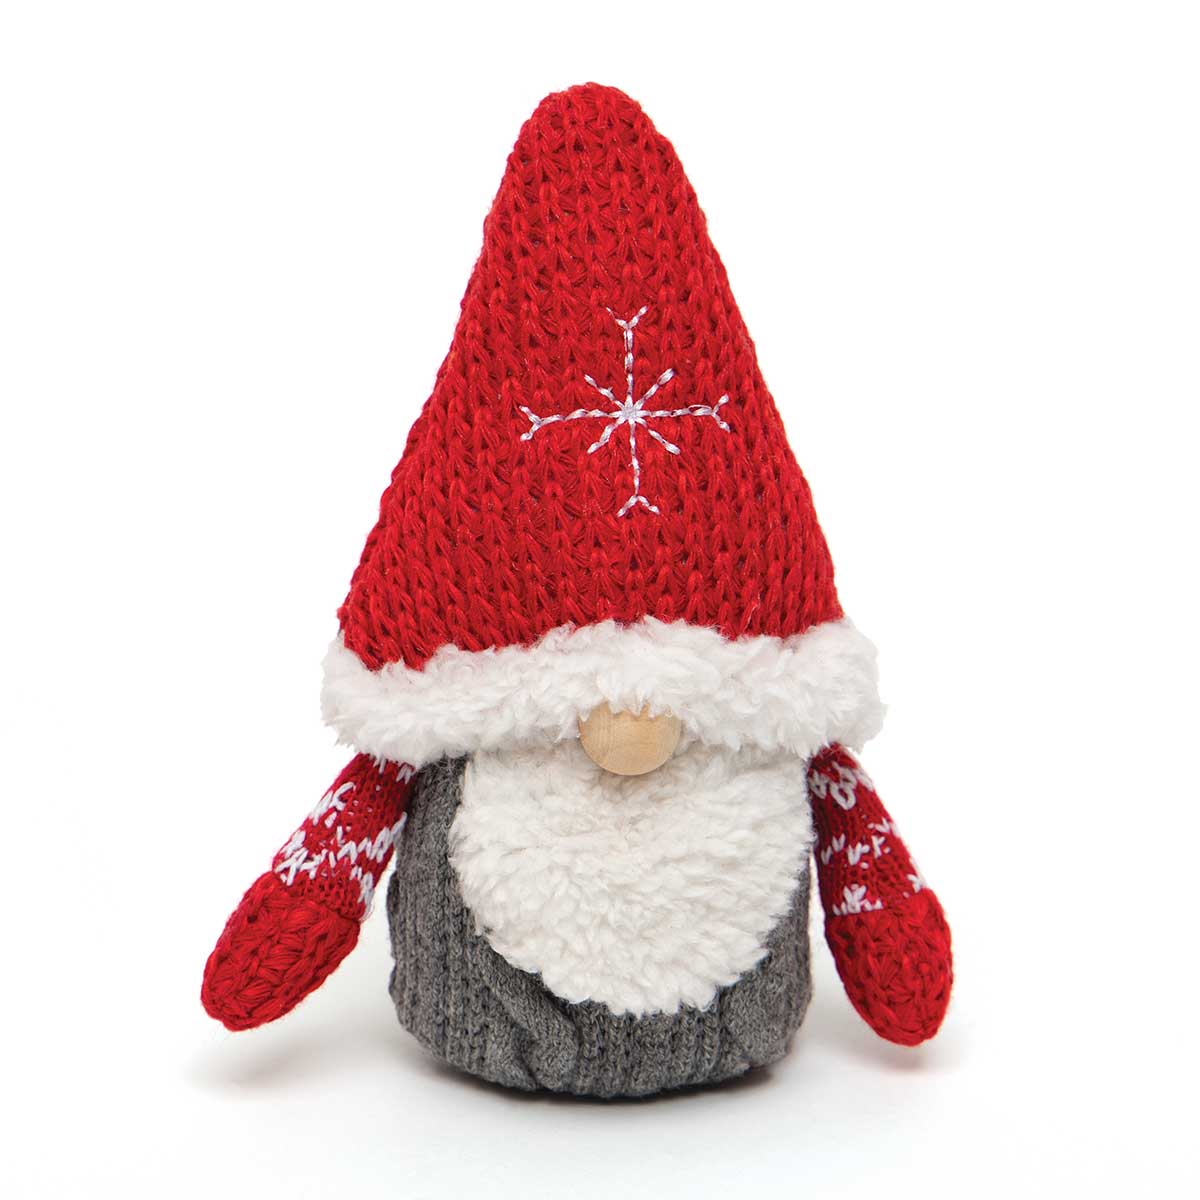 !SWEDE GNOME ORNAMENT RED/GREY WITH SWEATER HAT, WOOD v22